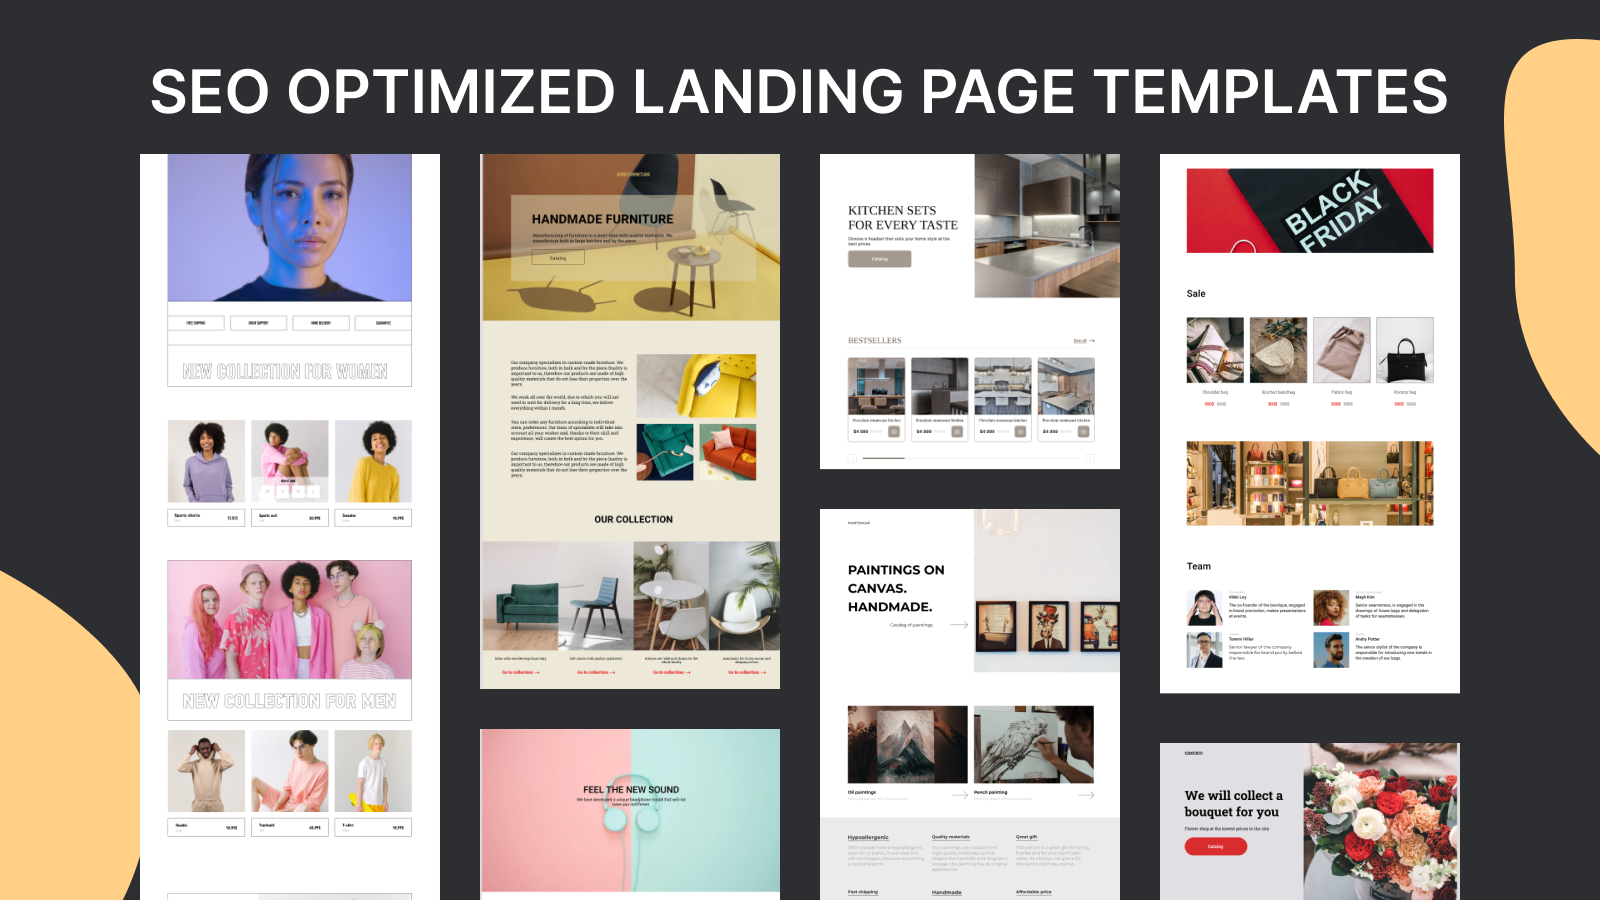 SEO optimized landing pages